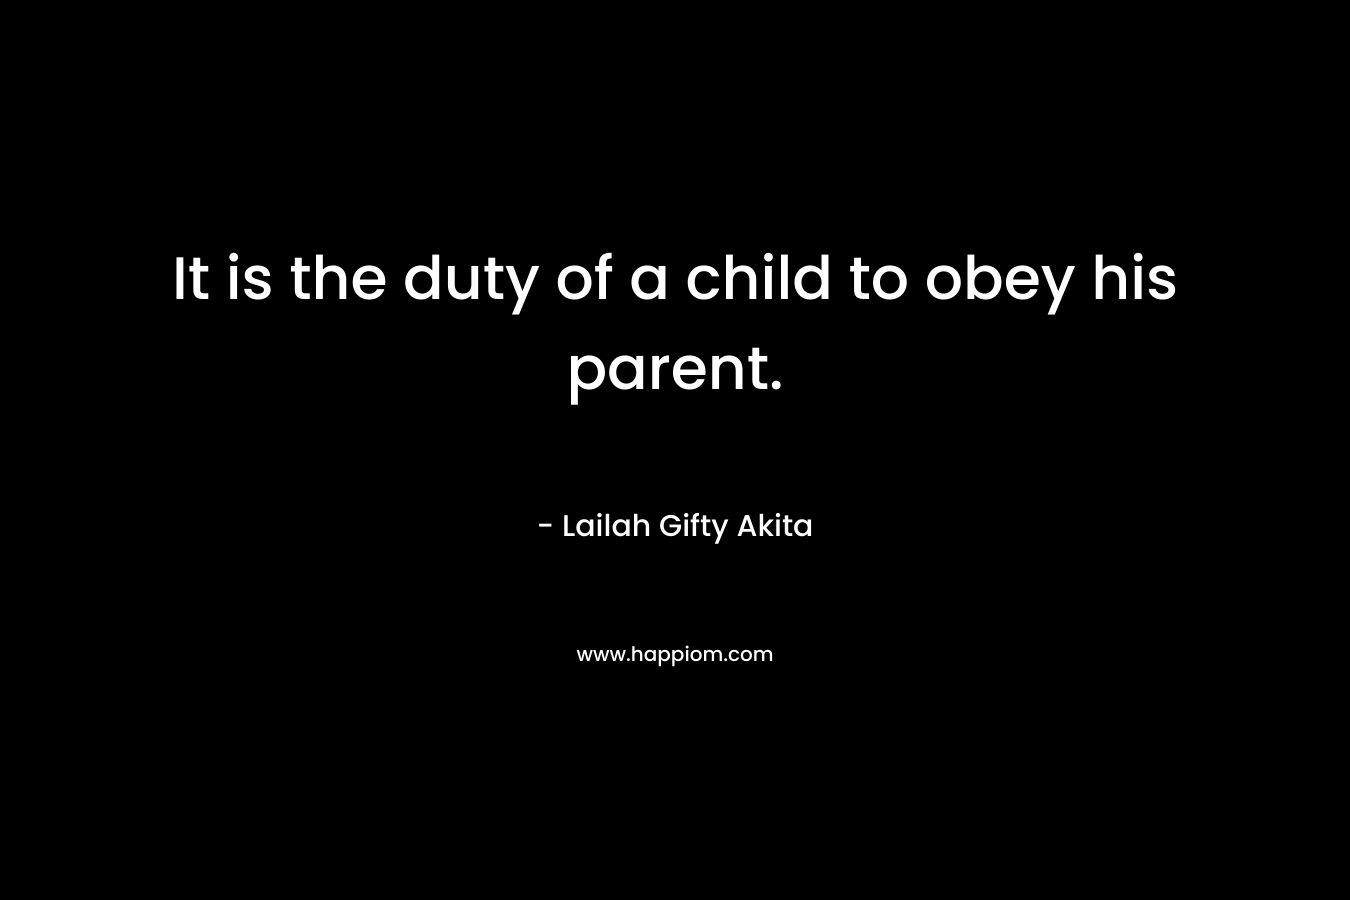 It is the duty of a child to obey his parent.